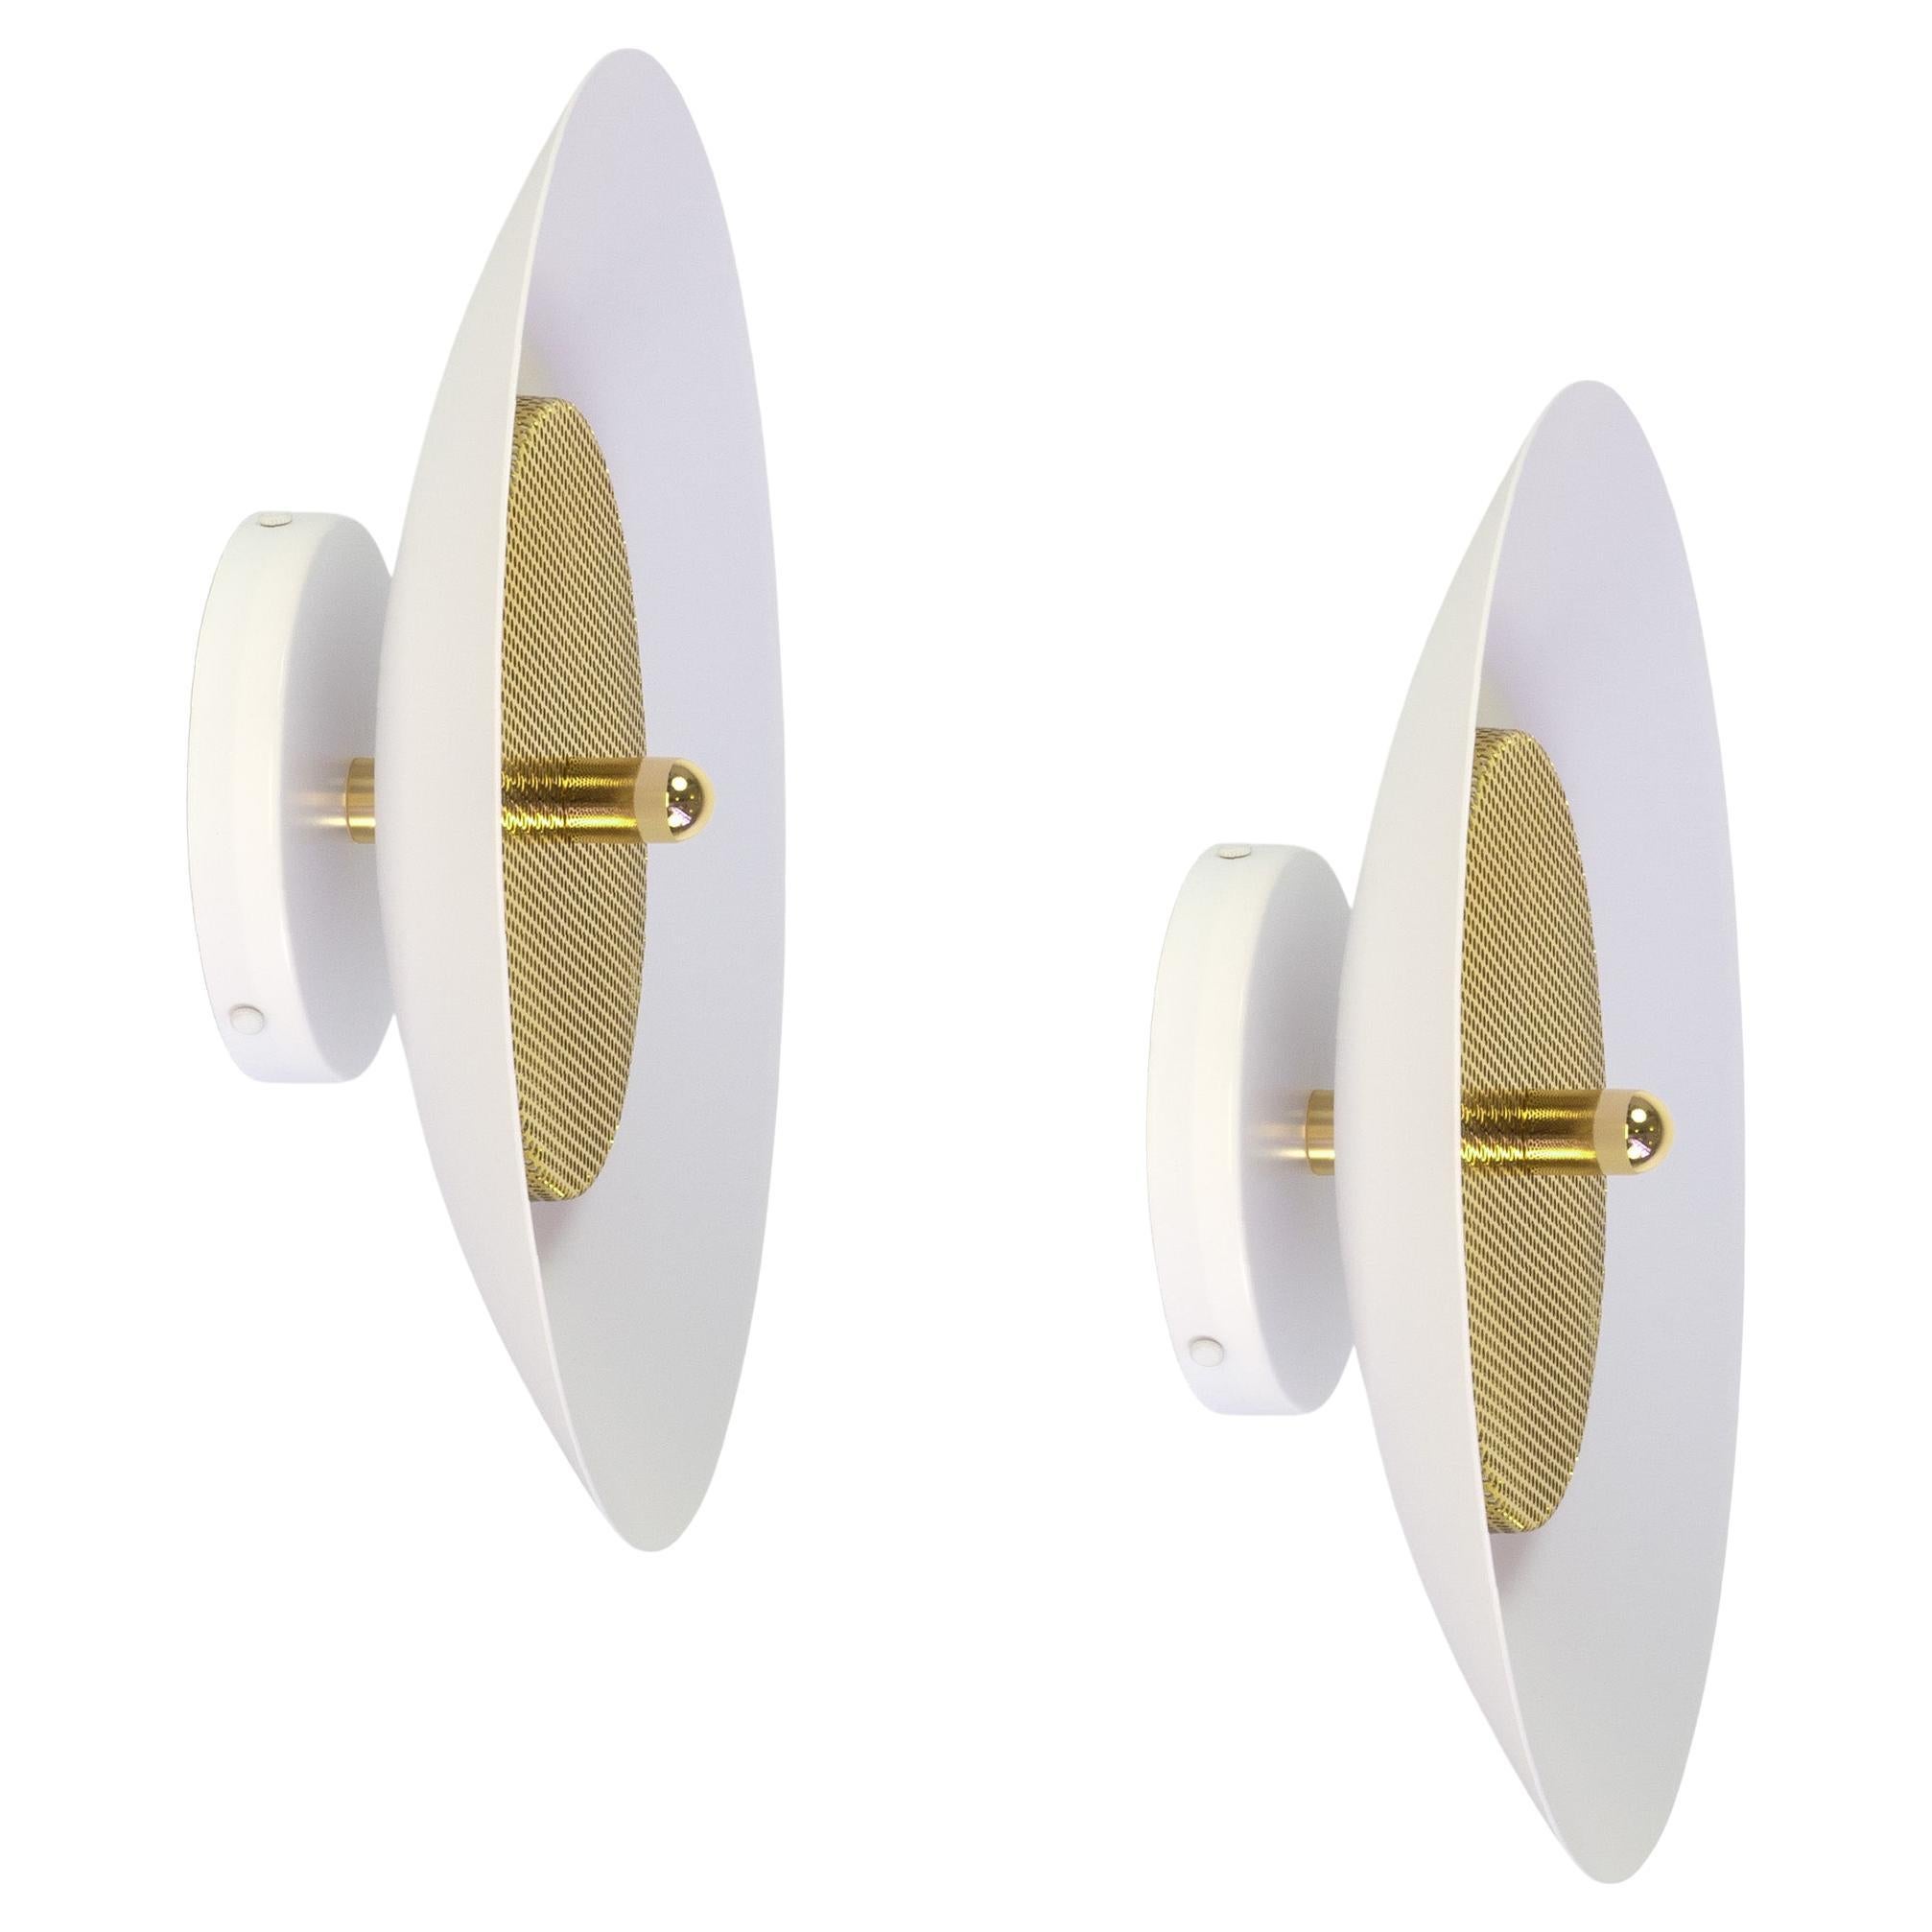 Pair of Signal Sconce from Souda, White and Brass, Made to Order